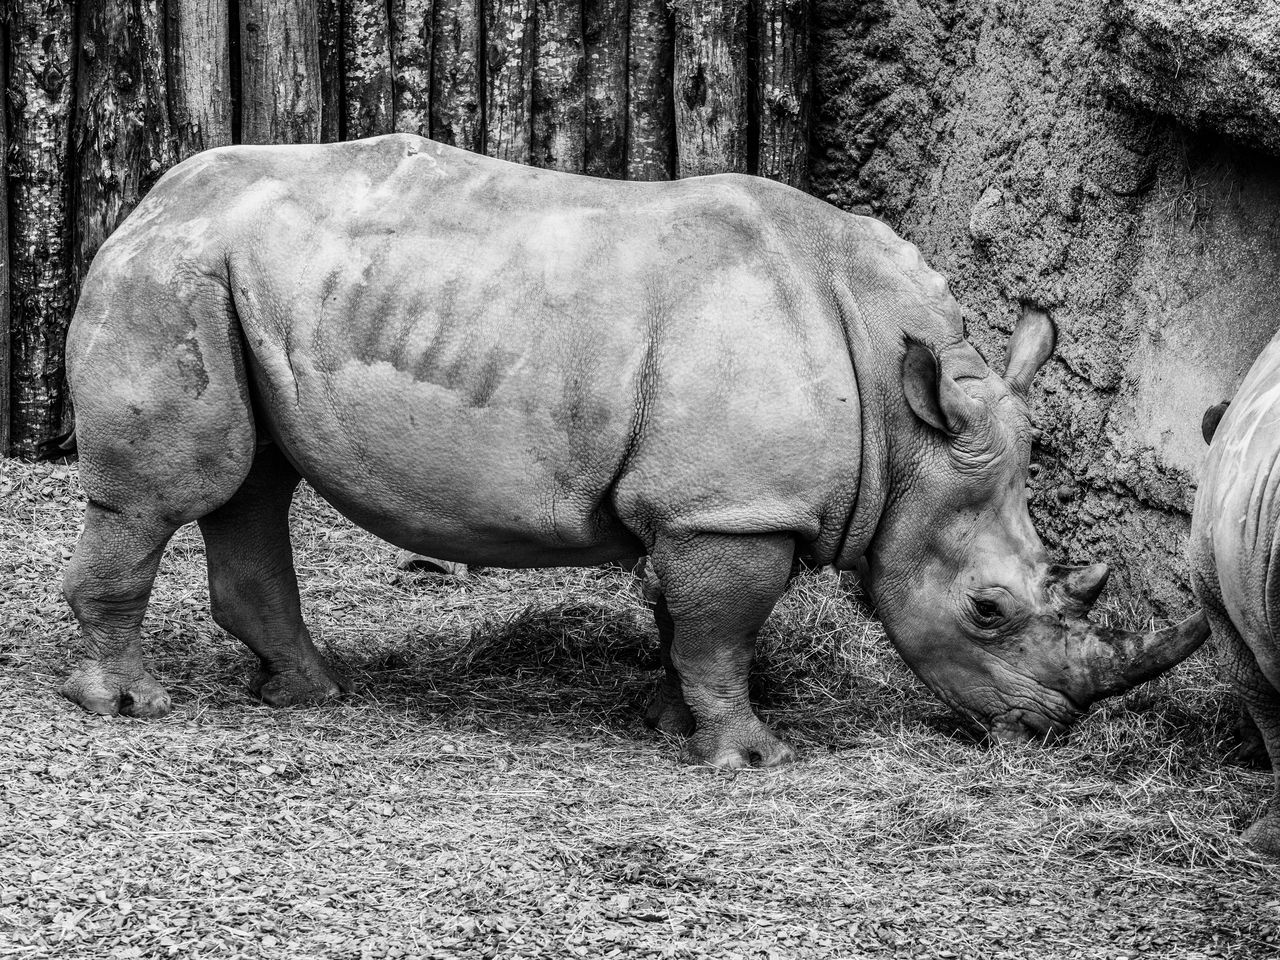 animal themes, animal, rhinoceros, mammal, animal wildlife, black and white, wildlife, monochrome, monochrome photography, one animal, no people, tree, day, land, nature, domestic animals, plant, zoo, field, side view, horned, outdoors, full length, animals in captivity, standing